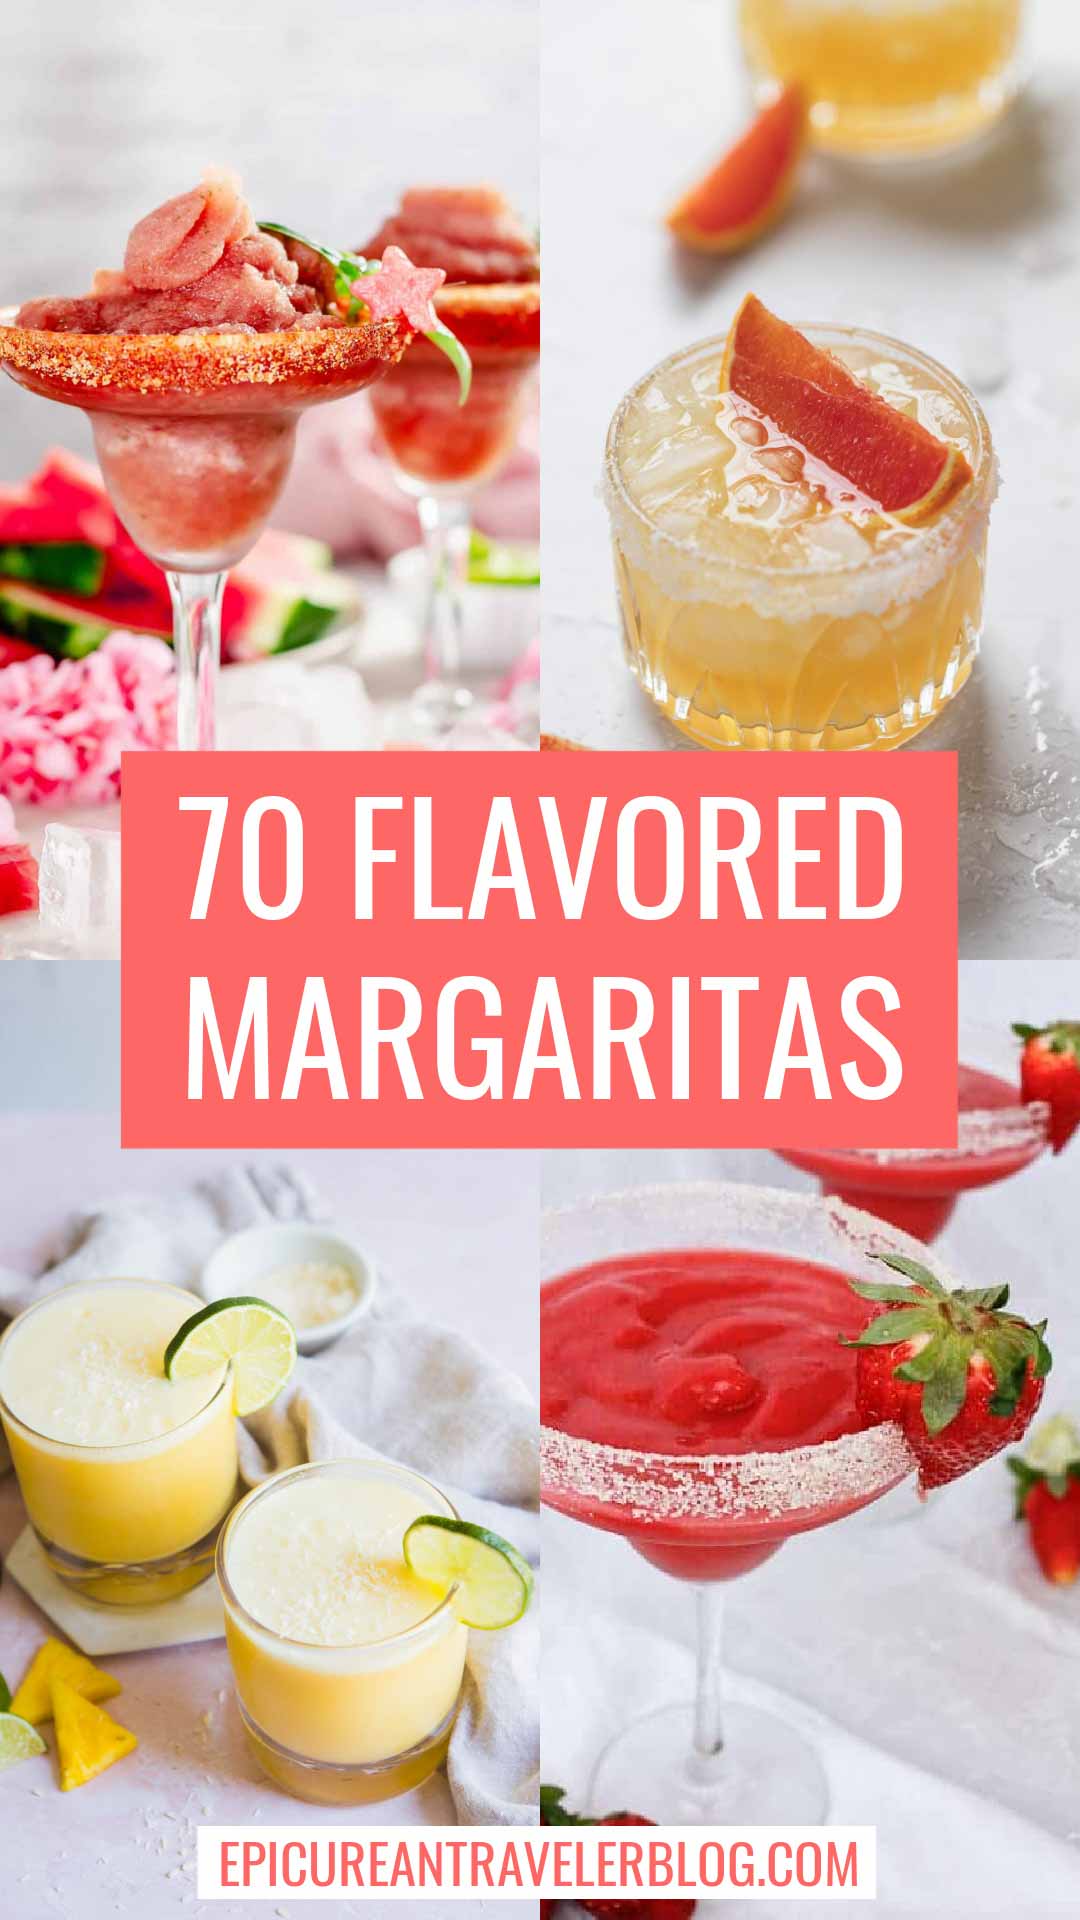 Text states "70 flavored margaritas" over collage of four different margaritas in unique flavors